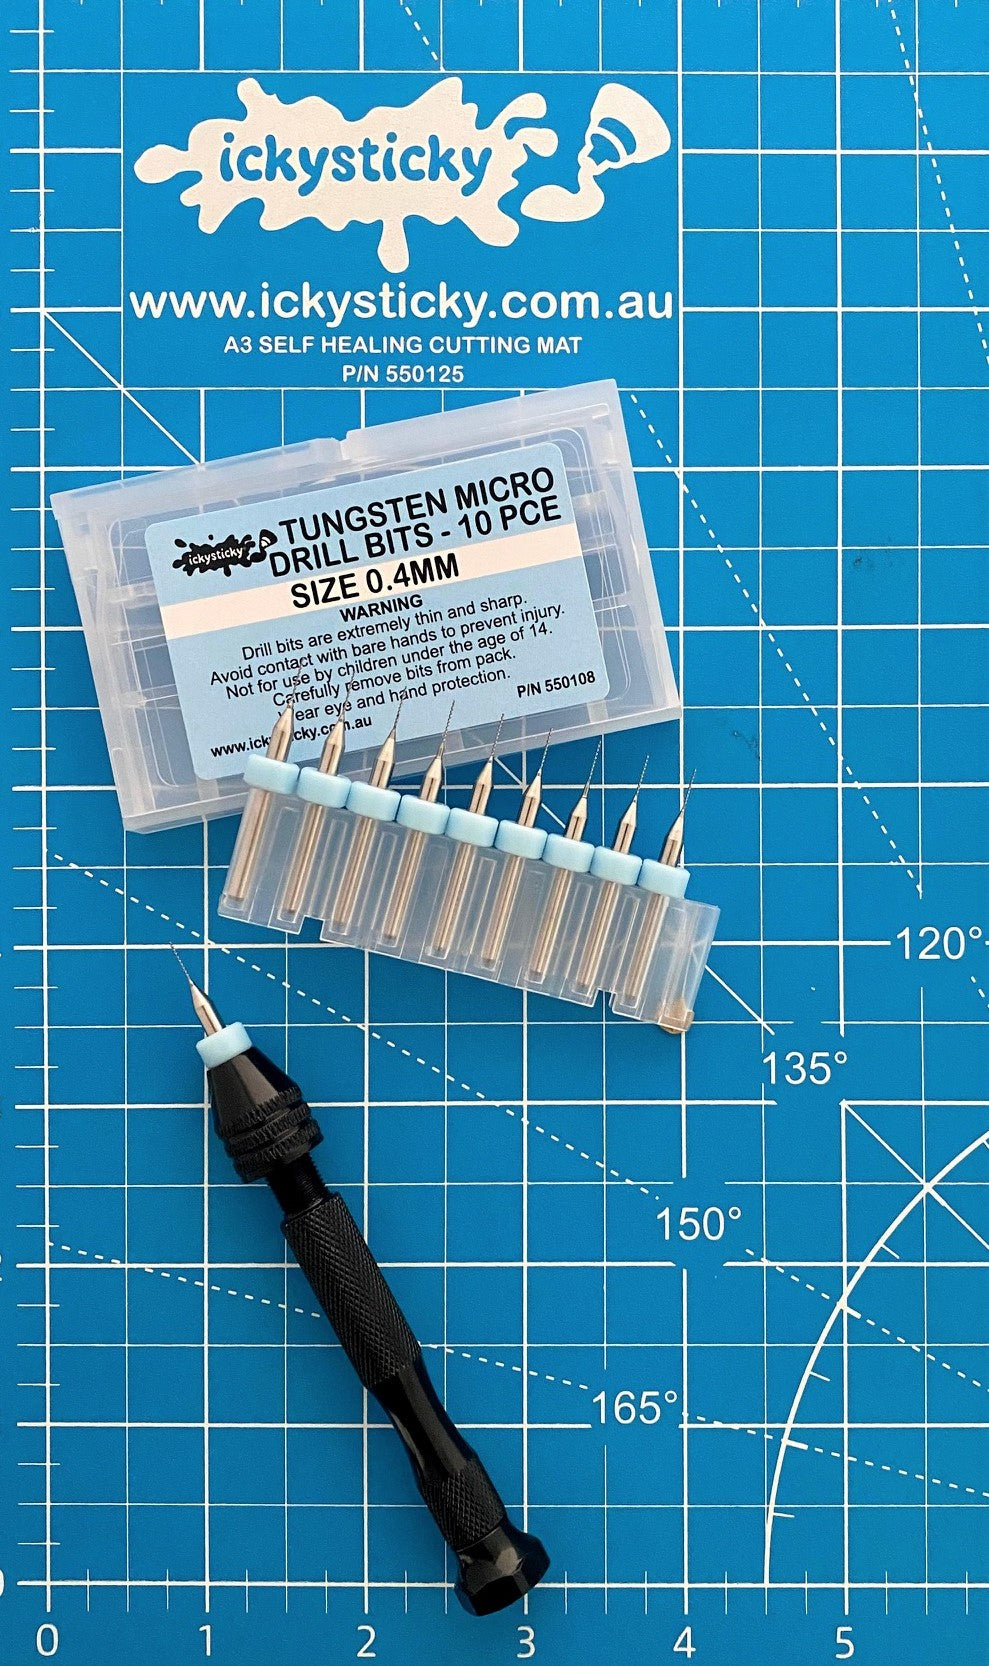 Ickysticky 10 Pce Tungsten Micro Drill Bits 0.4mm